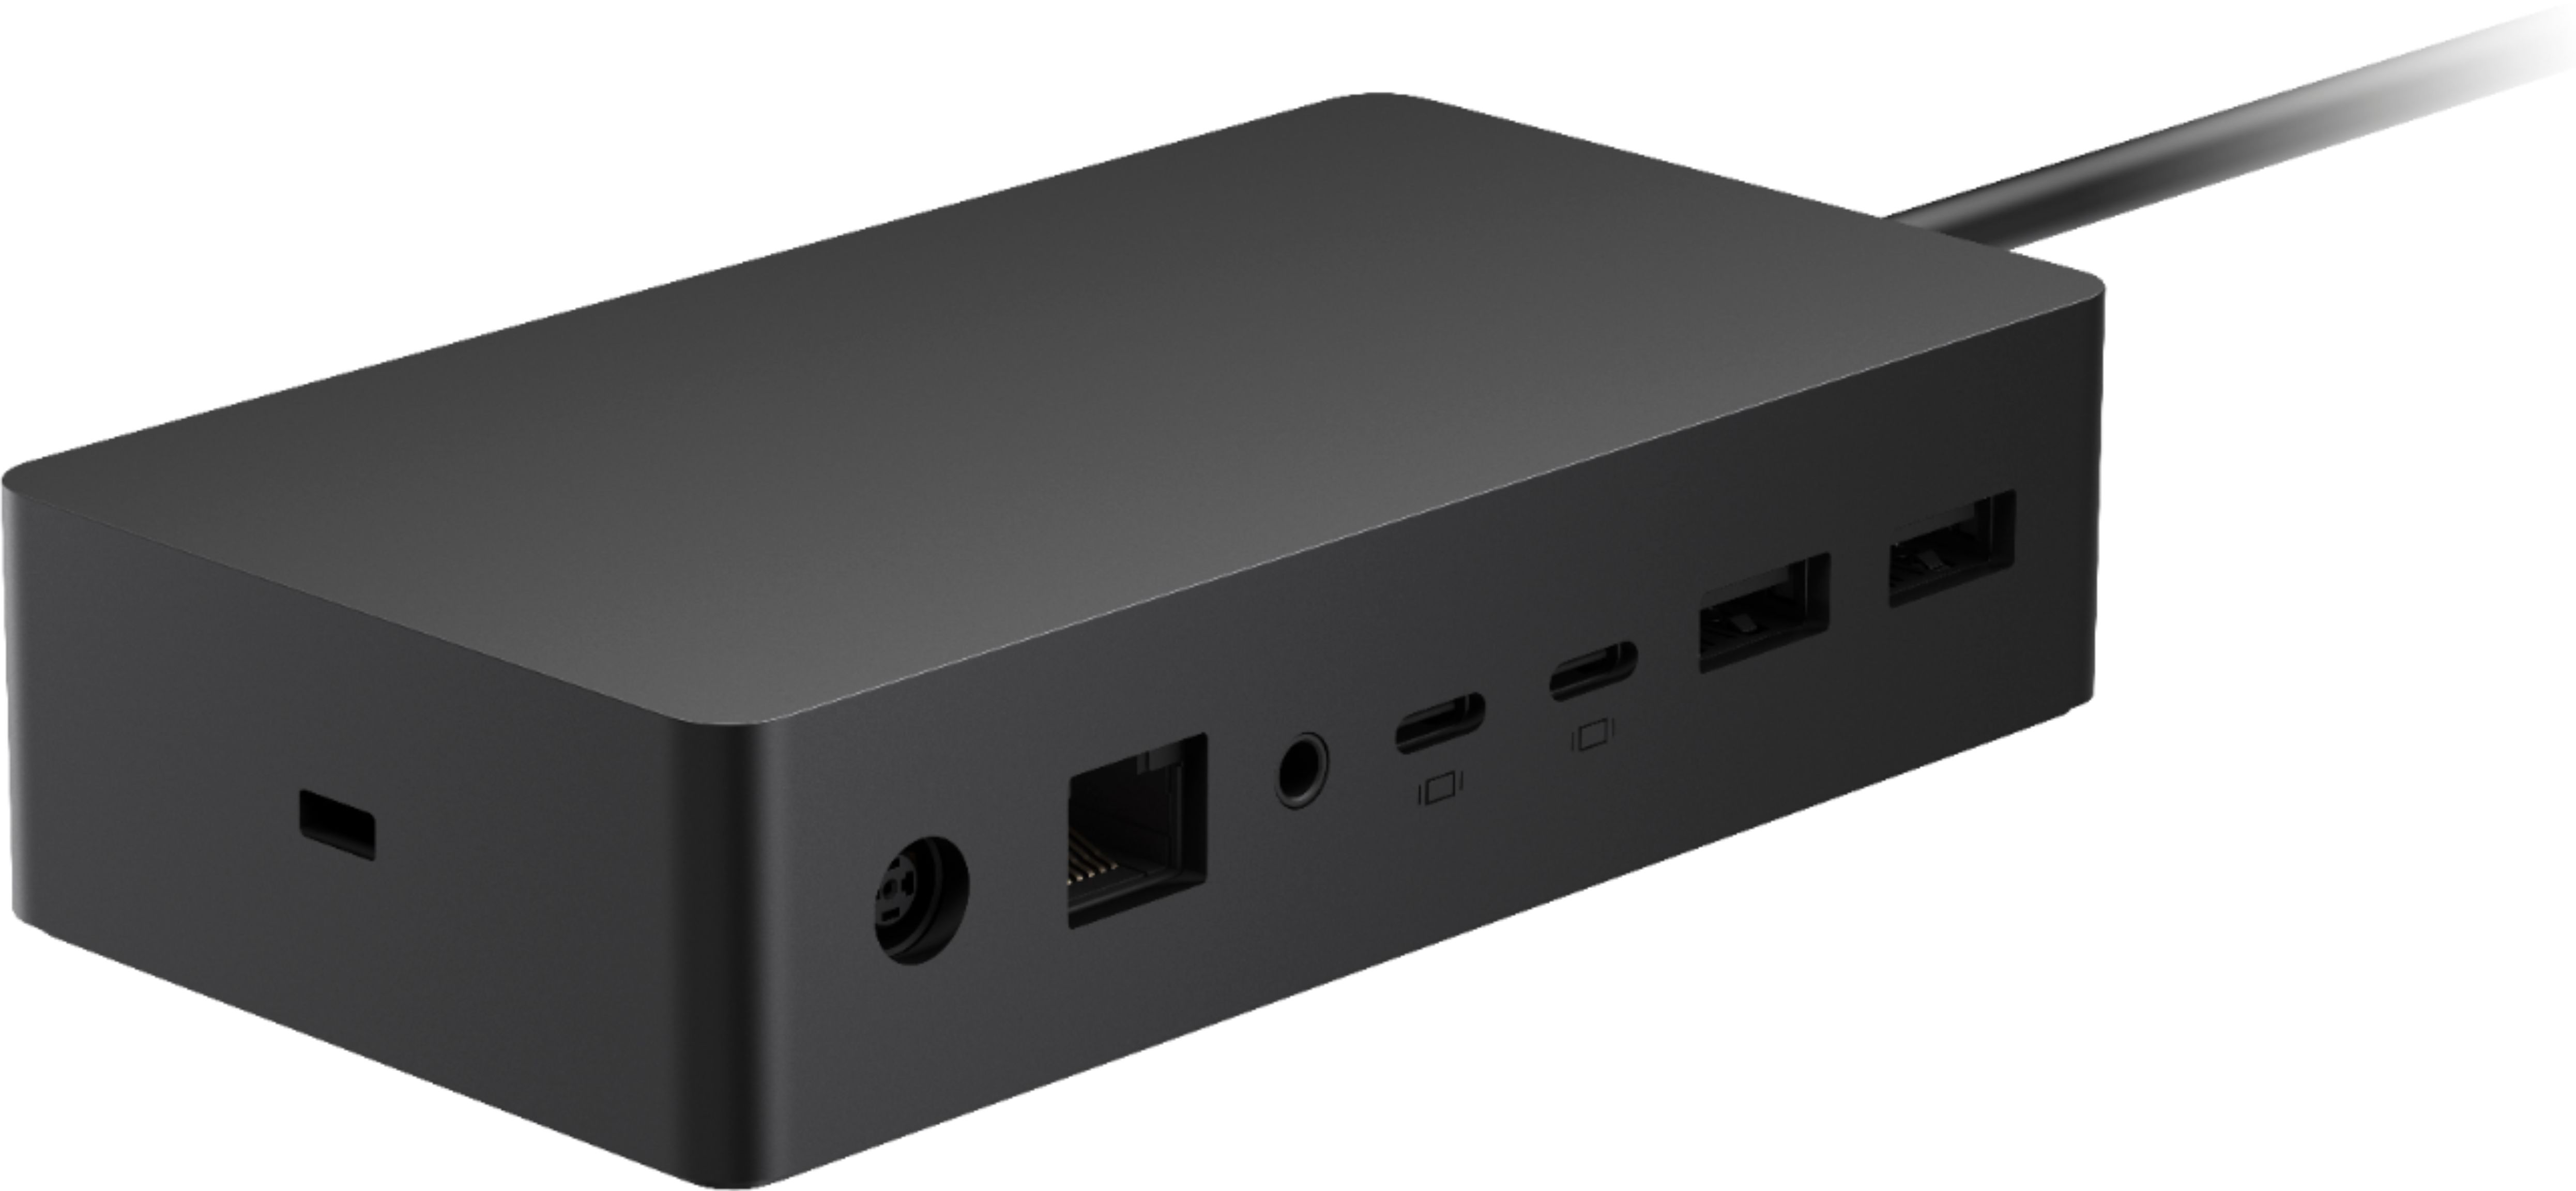 Questions and Answers: Microsoft Surface Dock 2 Black SVS-00001 - Best Buy